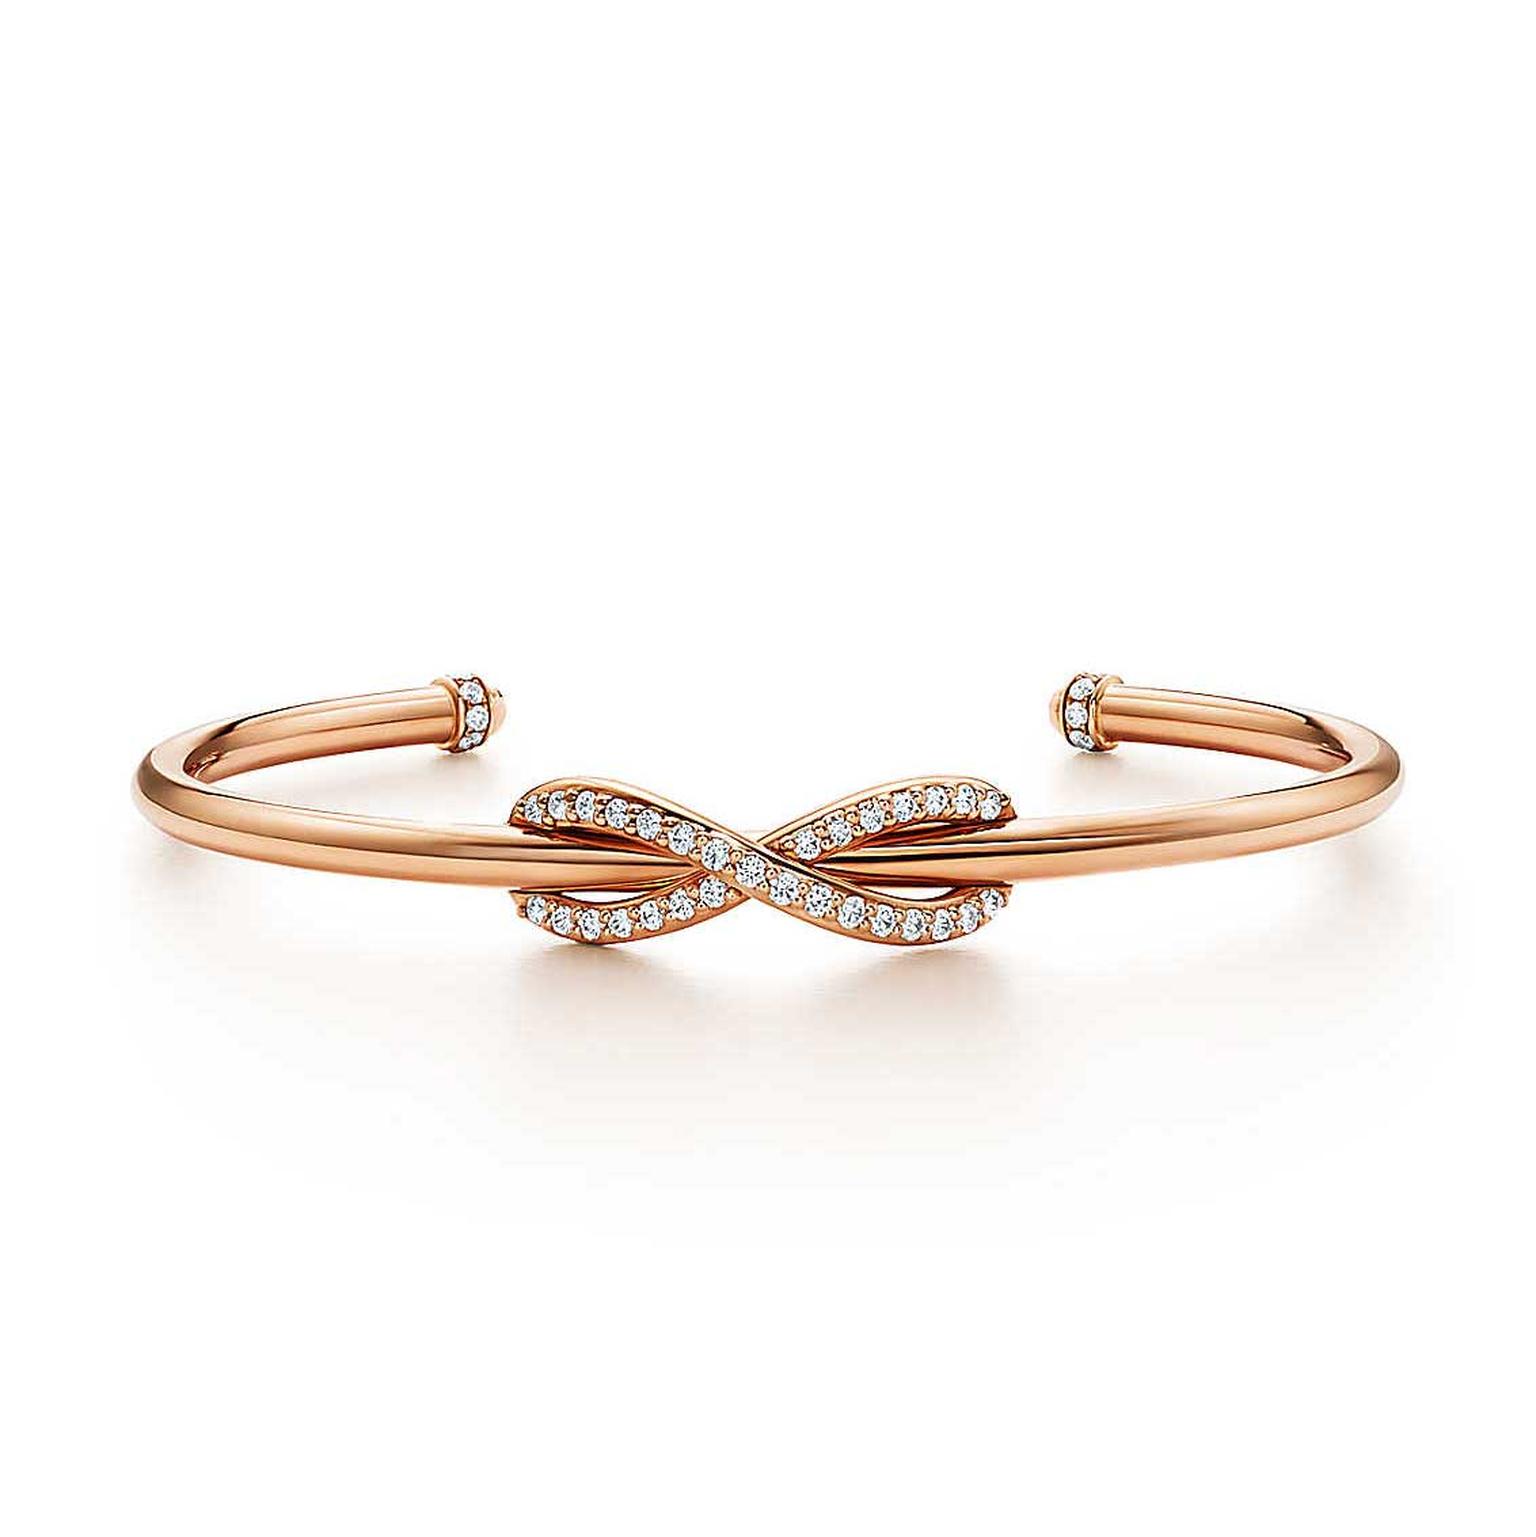 Tiffany Infinity cuff in rose gold with diamonds